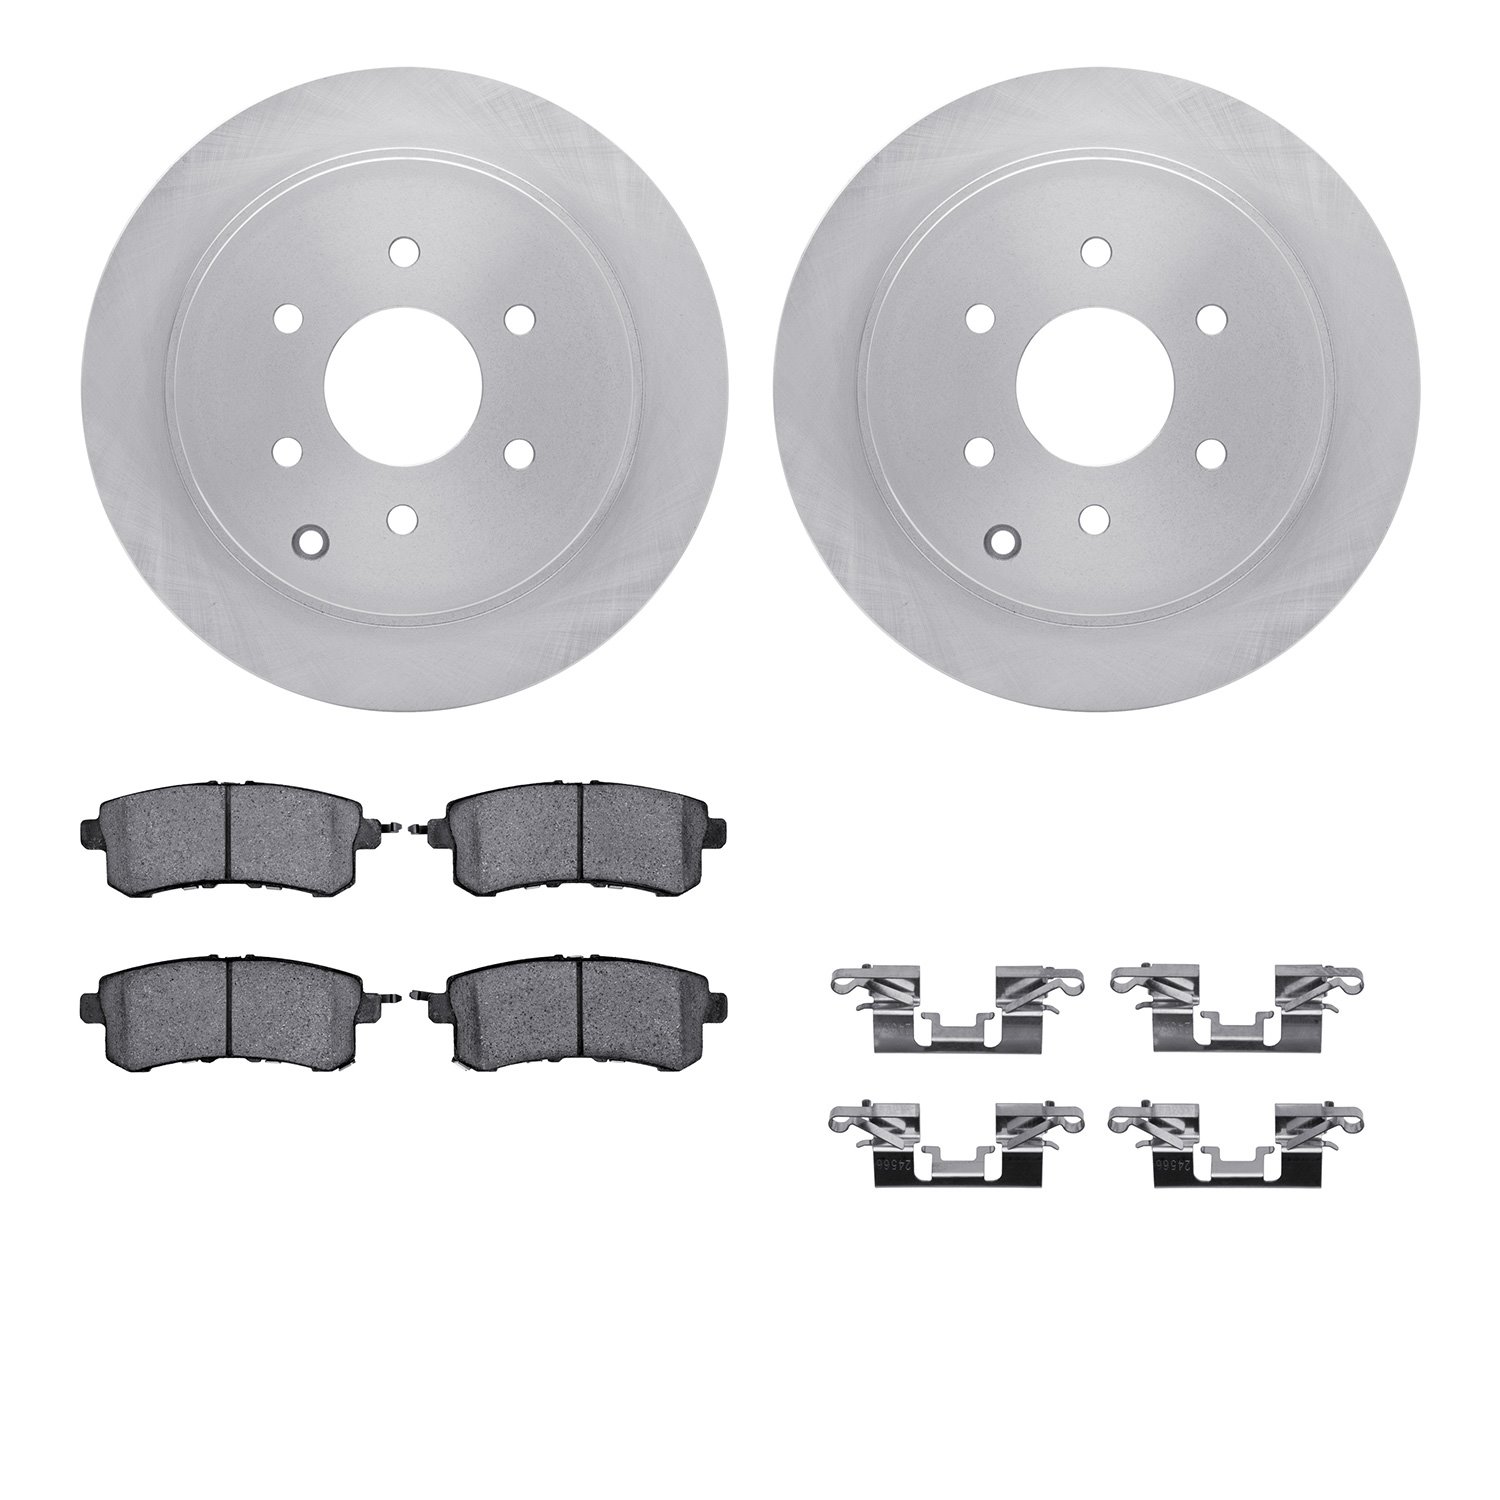 6312-68019 Brake Rotors with 3000-Series Ceramic Brake Pads Kit with Hardware, Fits Select Infiniti/Nissan, Position: Rear